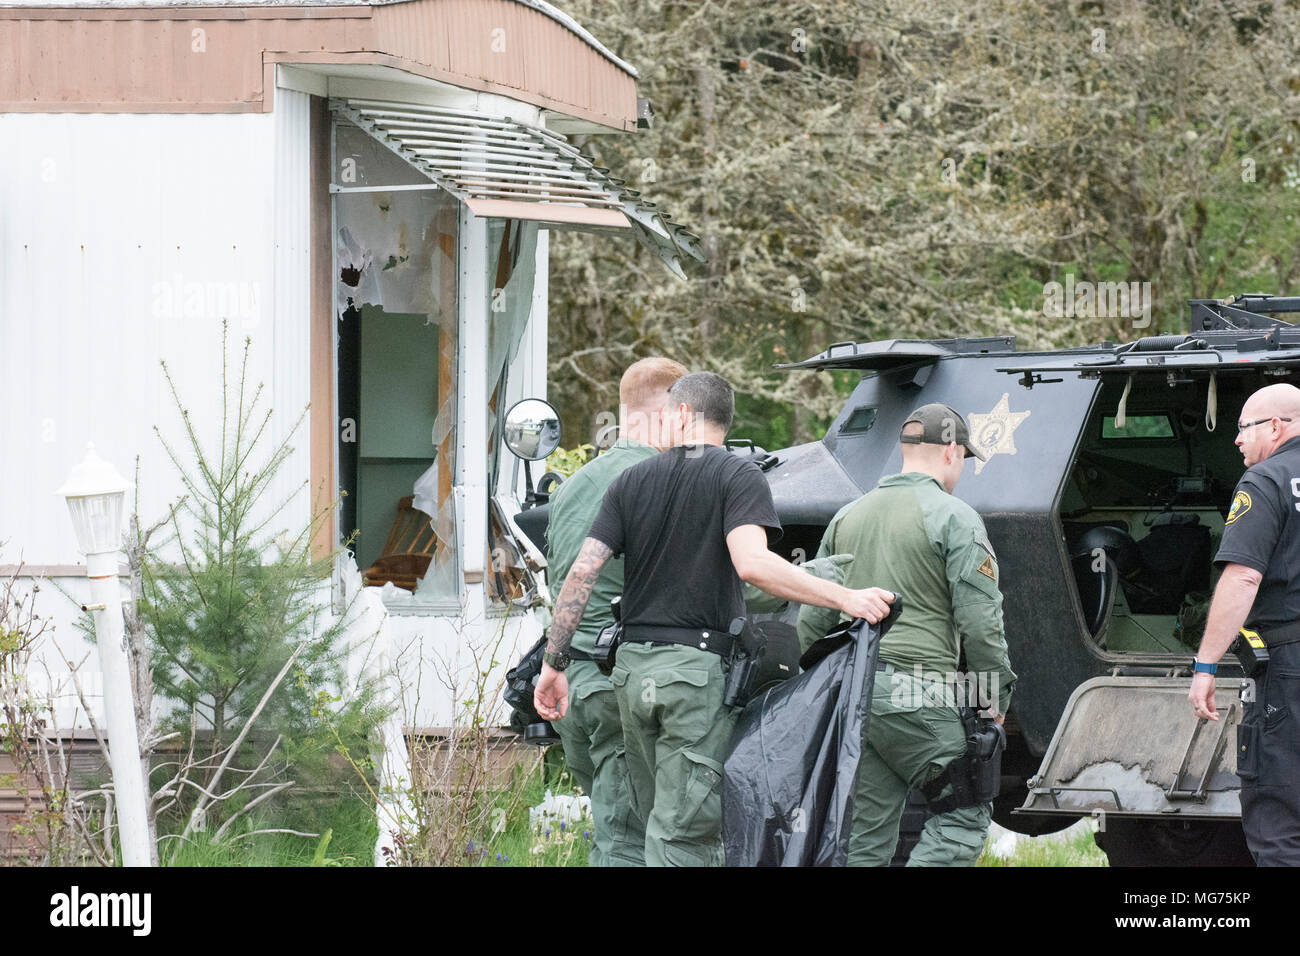 Shelton, Washington, USA, 27 April 2018.  Mason County Sheriff respond to the scene where a man stabbed a process server.  This was taken after the man was arrested and taken to the hospital witha dog bite wound.  It appears that police rammed the trailer with their SWAT vehicle.  Hidden Haven Mobile Home park scene of stand off today in Mason County. (Shawna Whelan) Credit: Shawna Whelan/Alamy Live News Stock Photo